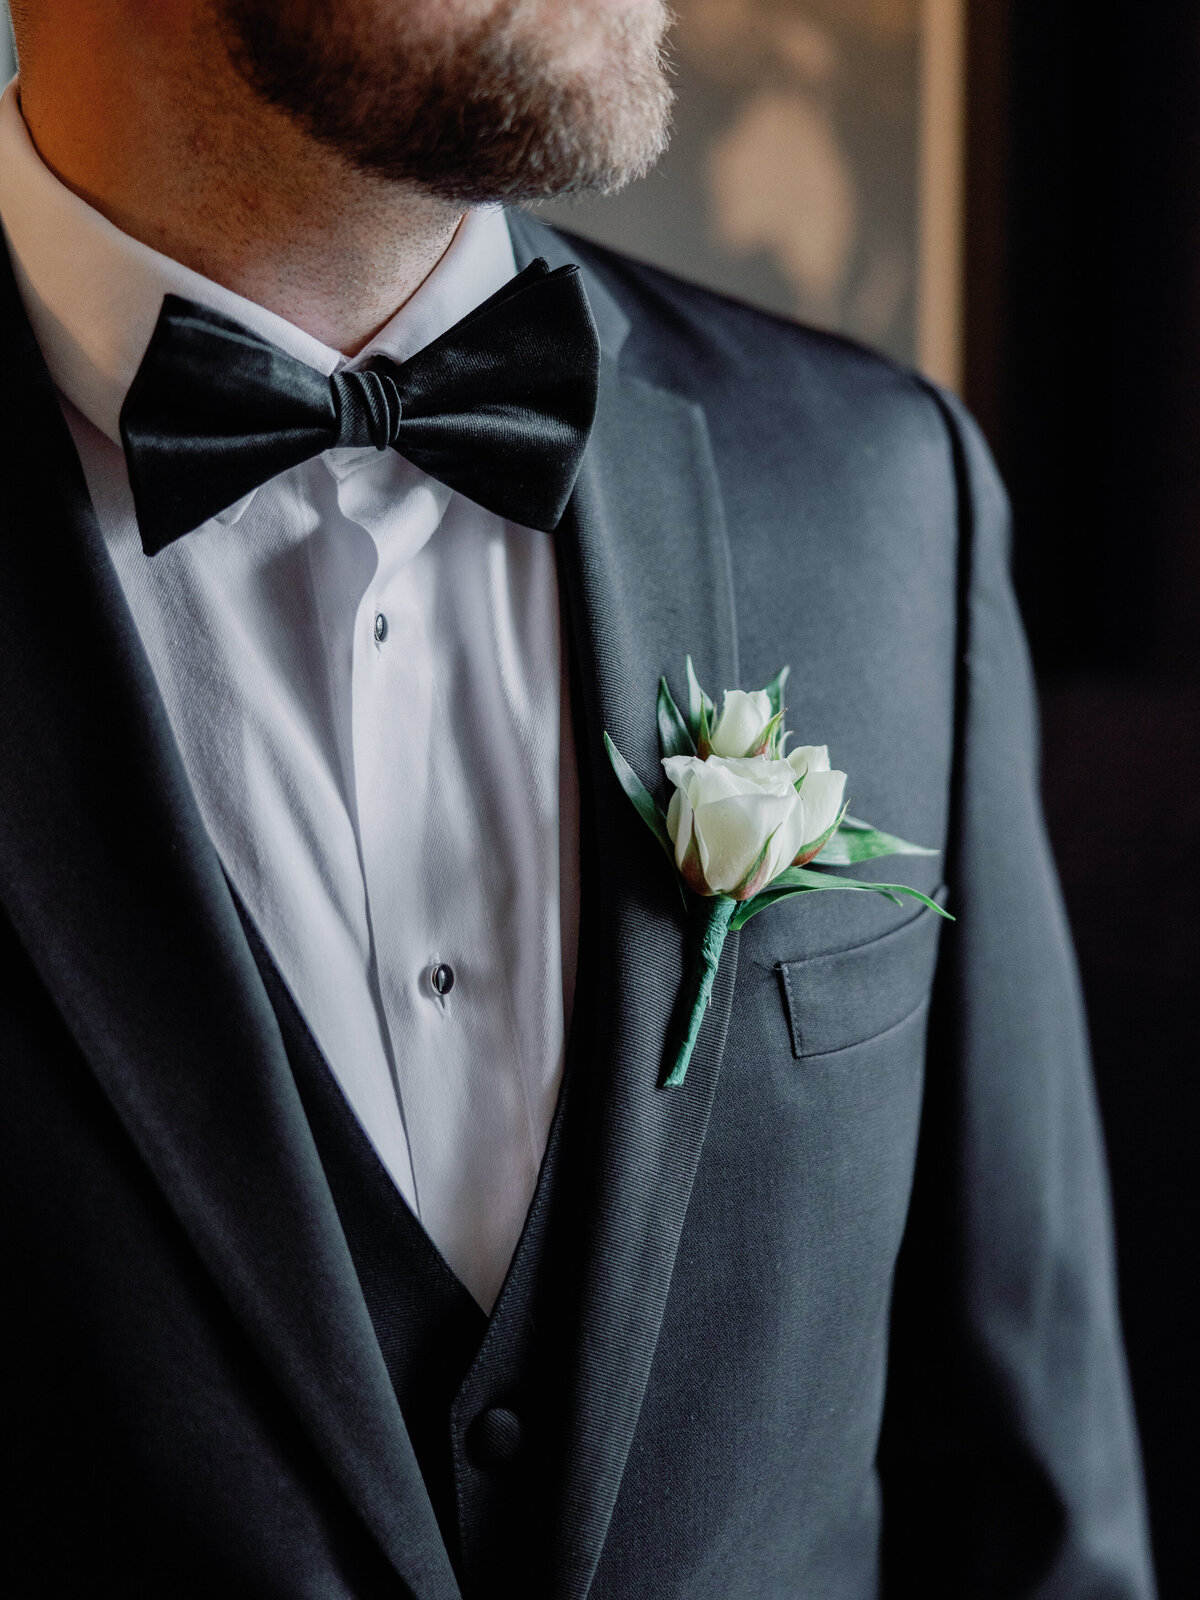 A closeup of the groom's boutonniere pinned on his suit